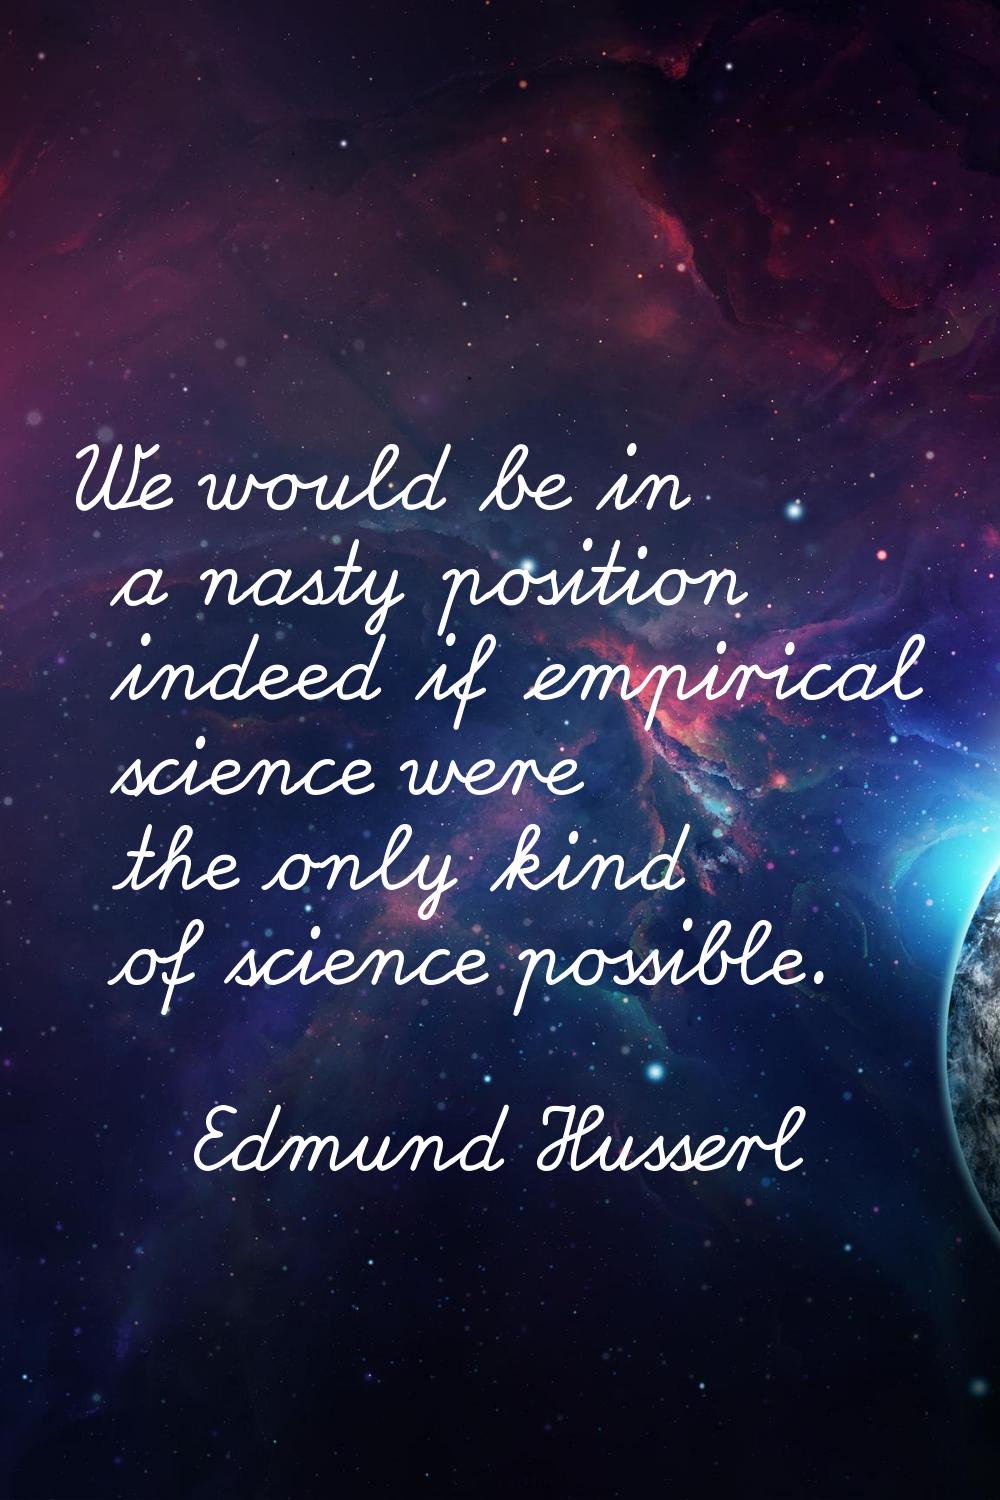 We would be in a nasty position indeed if empirical science were the only kind of science possible.